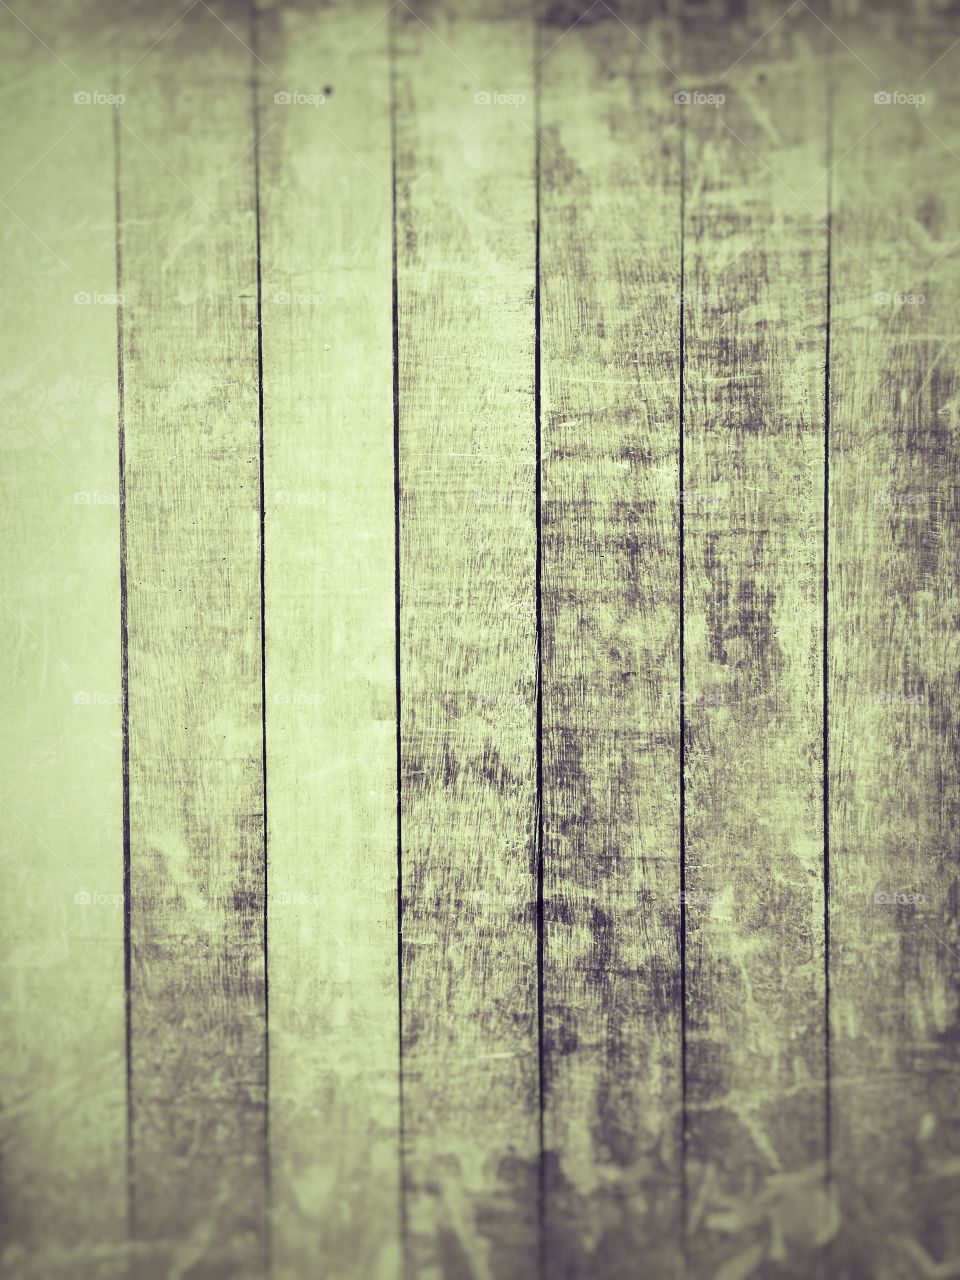 Wood board in black and white with grunge style blurred top and bottom 